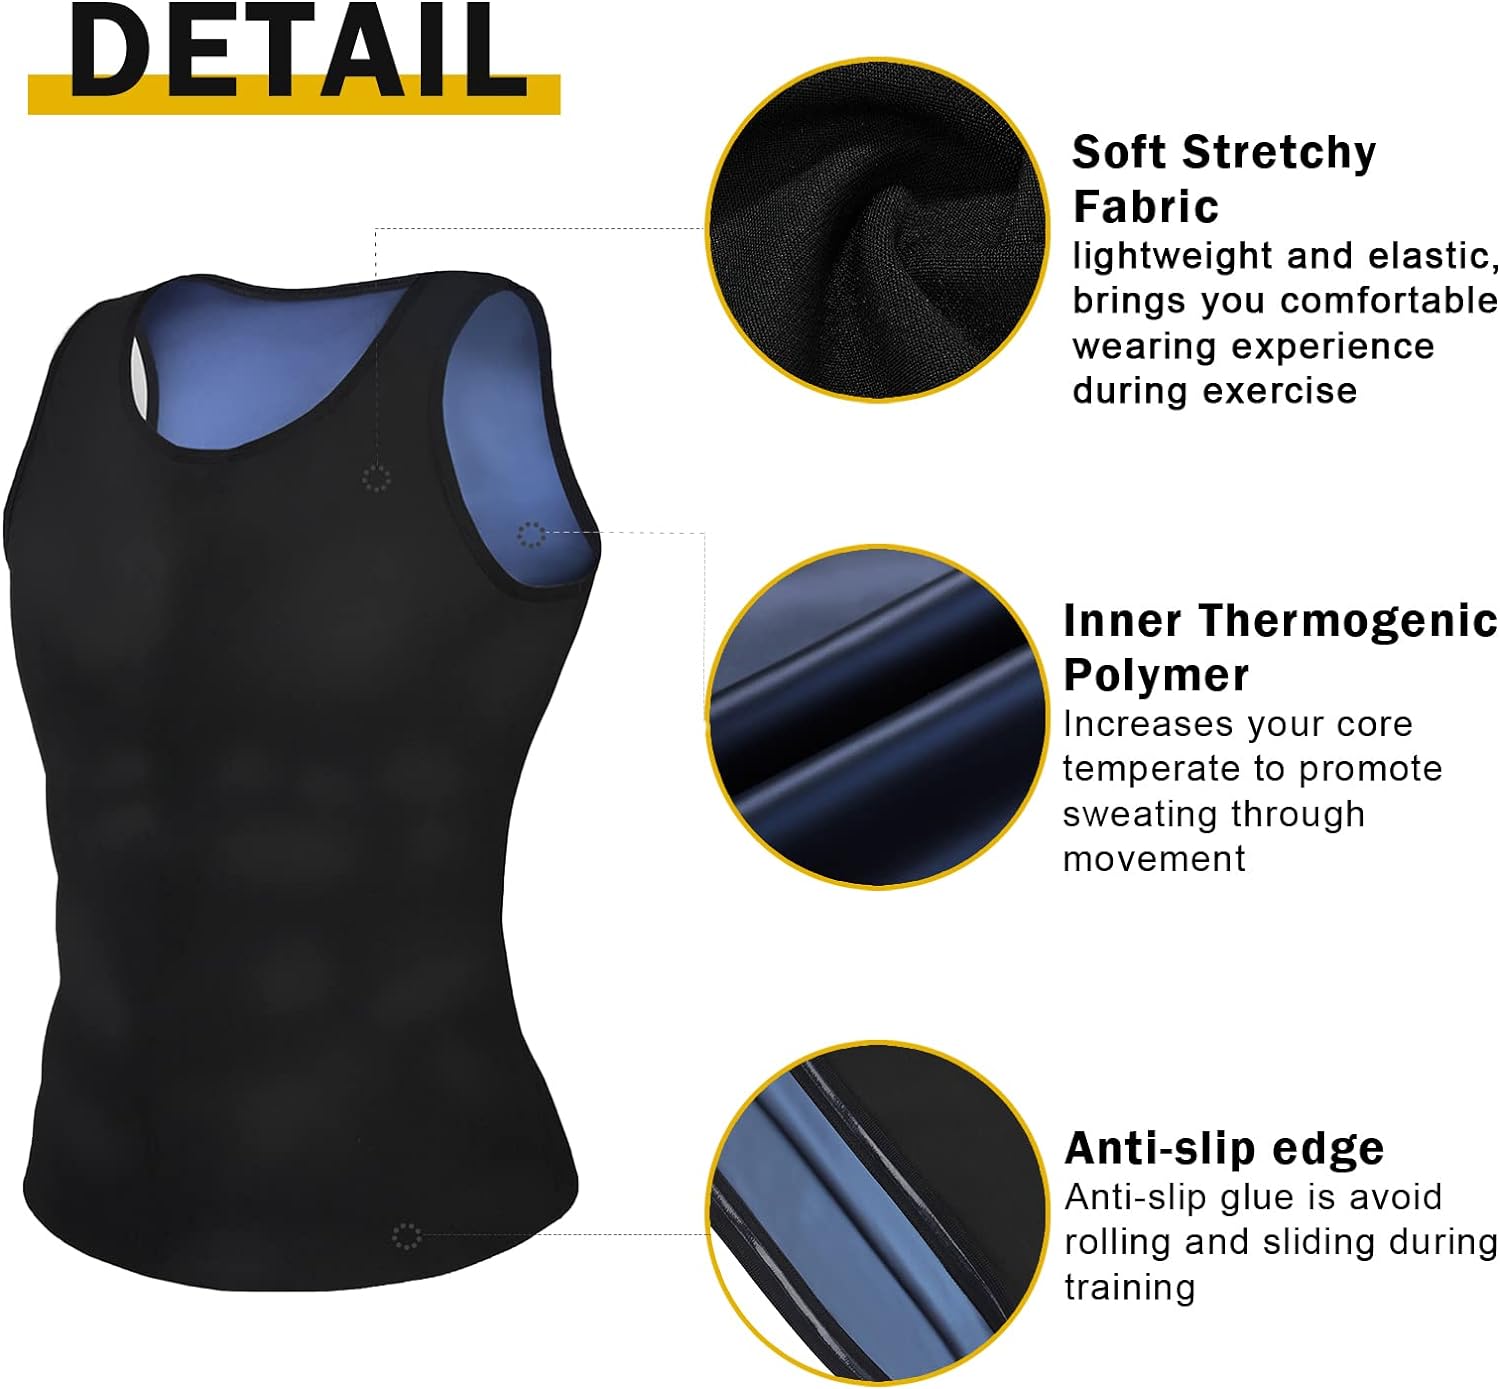 Sauna Suits for Weight Loss - Workout Vest Gym Shirt Shaper